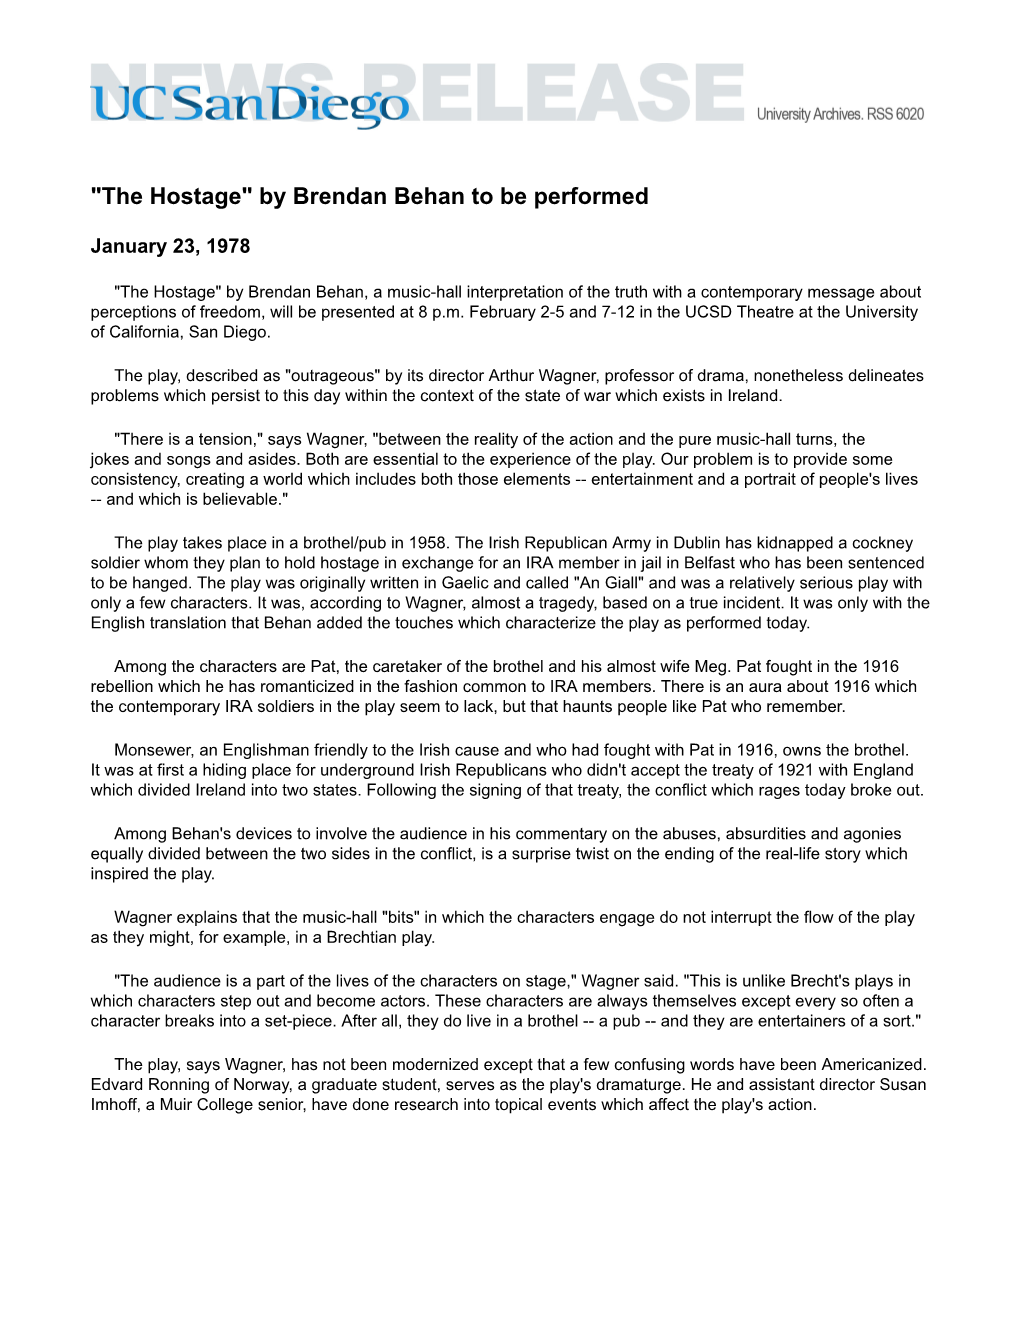 "The Hostage" by Brendan Behan to Be Performed